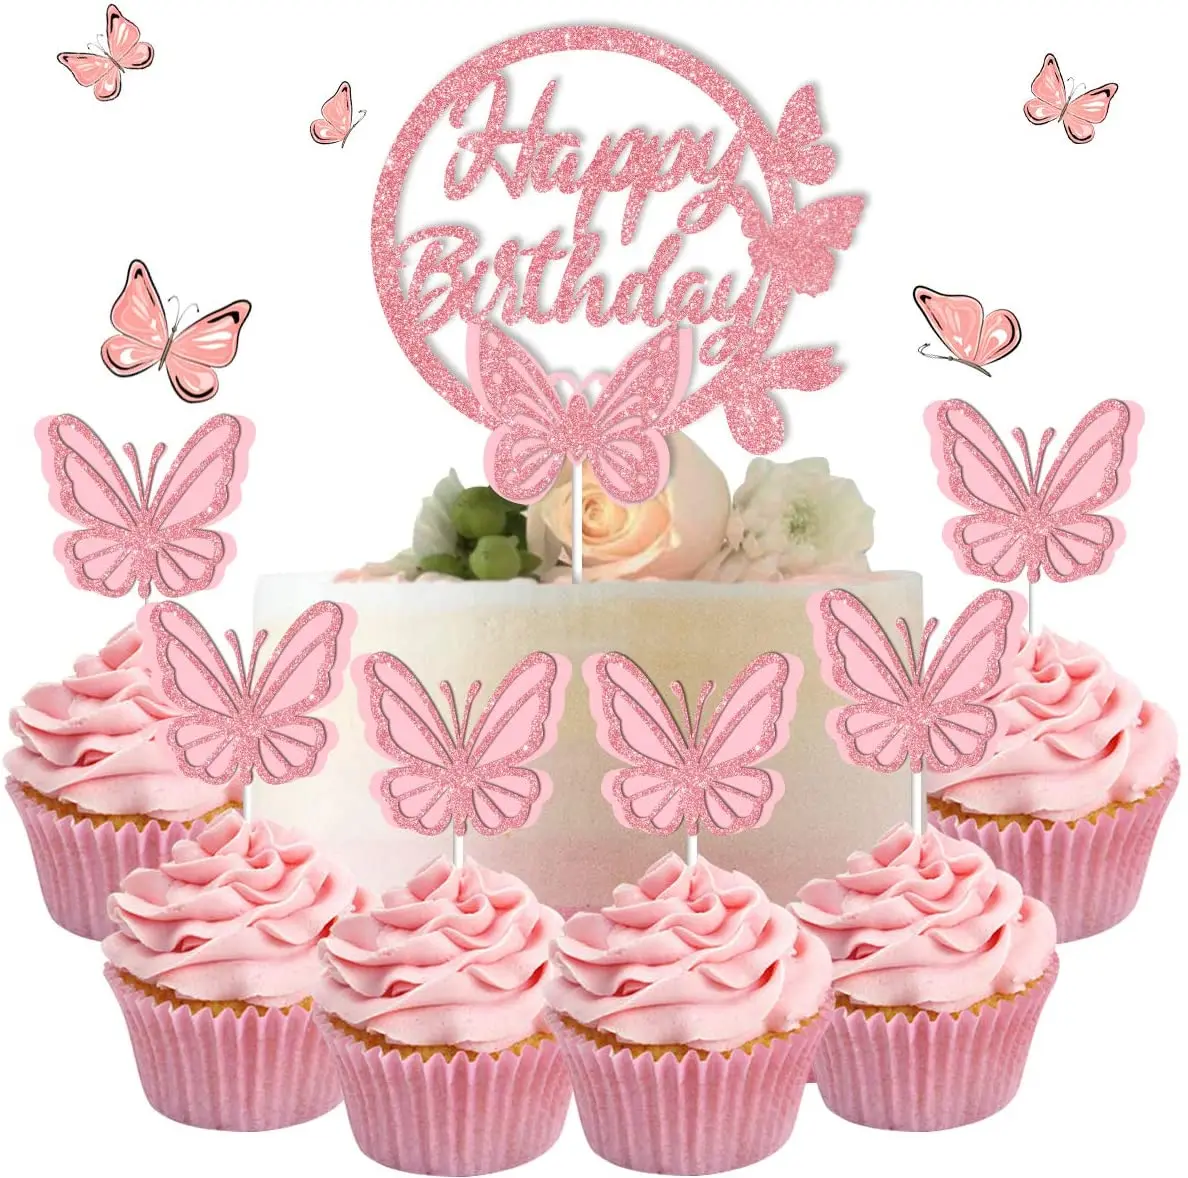 25 Pack Butterfly Happy Birthday Cake Toppers Pink Butterfly CupCake Toppers Picks for Girls Women Birthday Party Decoration